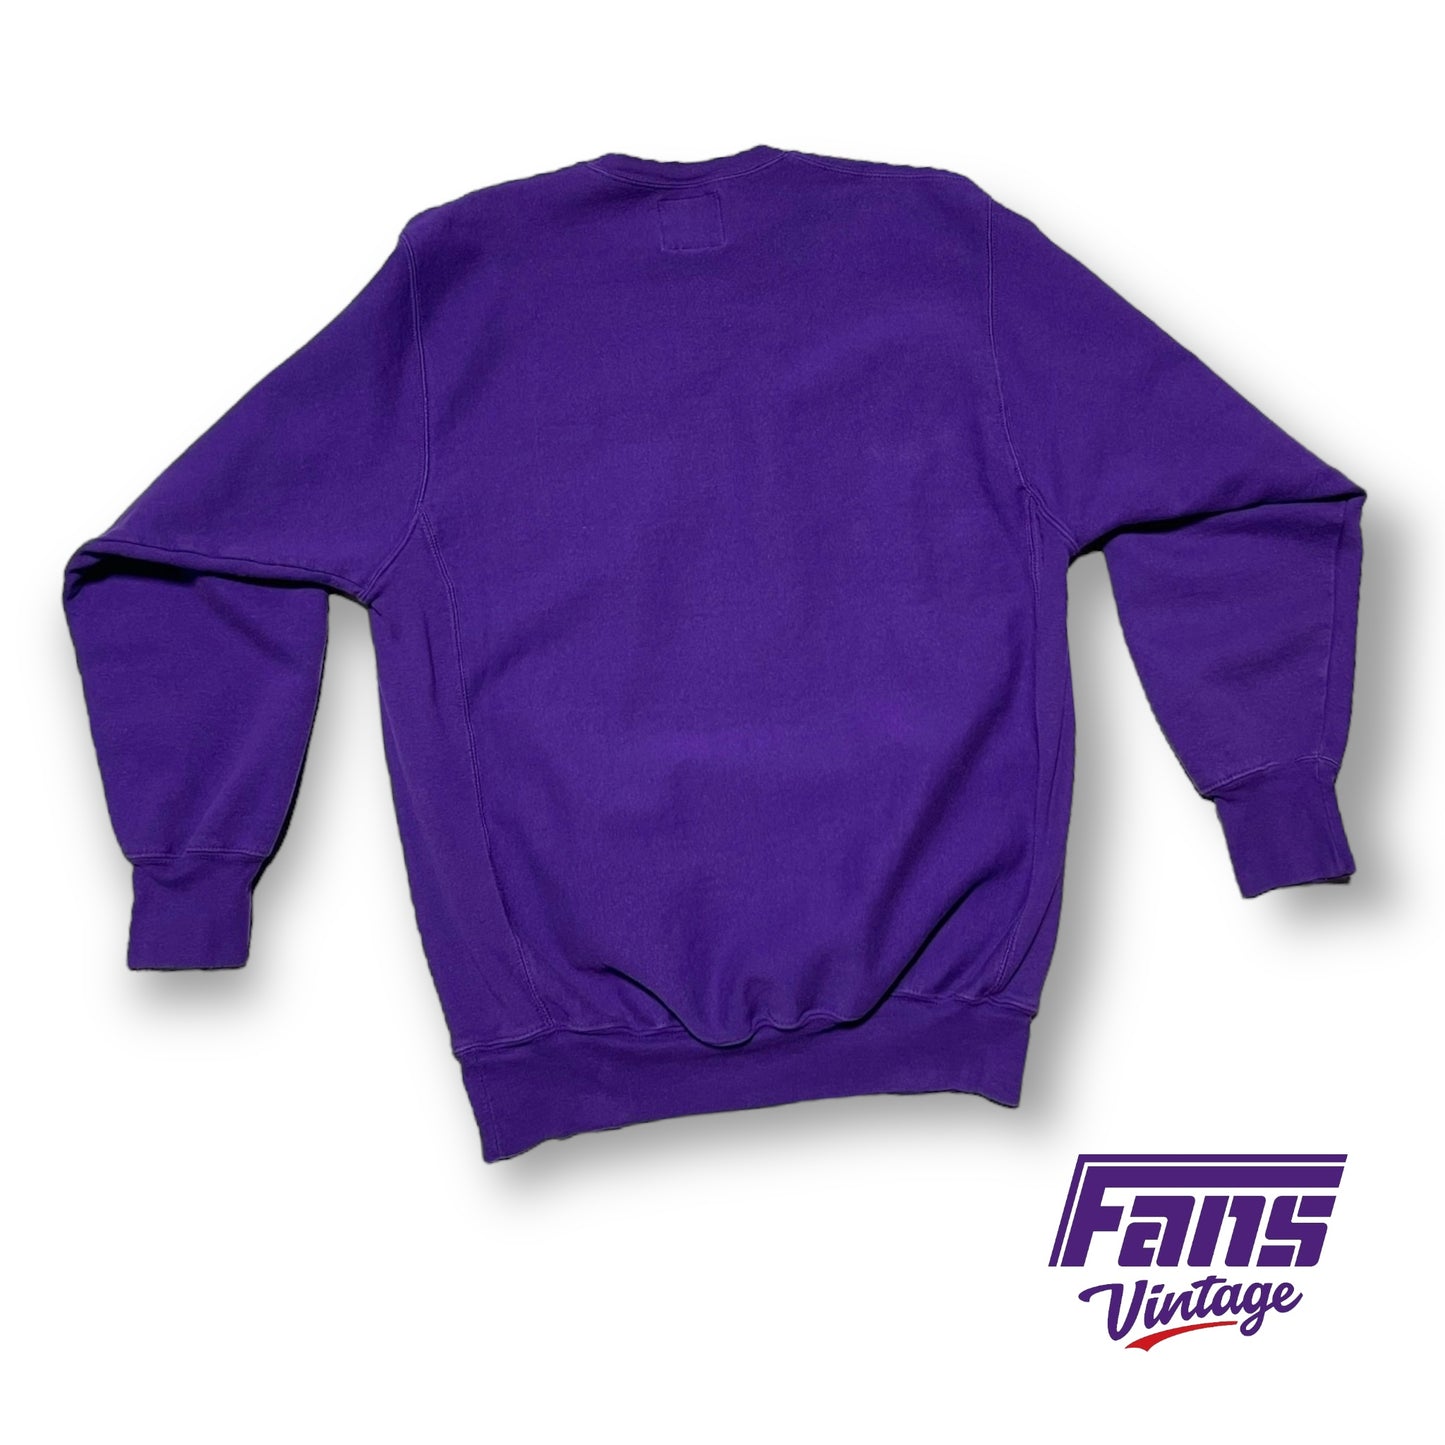 Vintage TCU Crewneck Sweater - Ultra thick and Cozy!